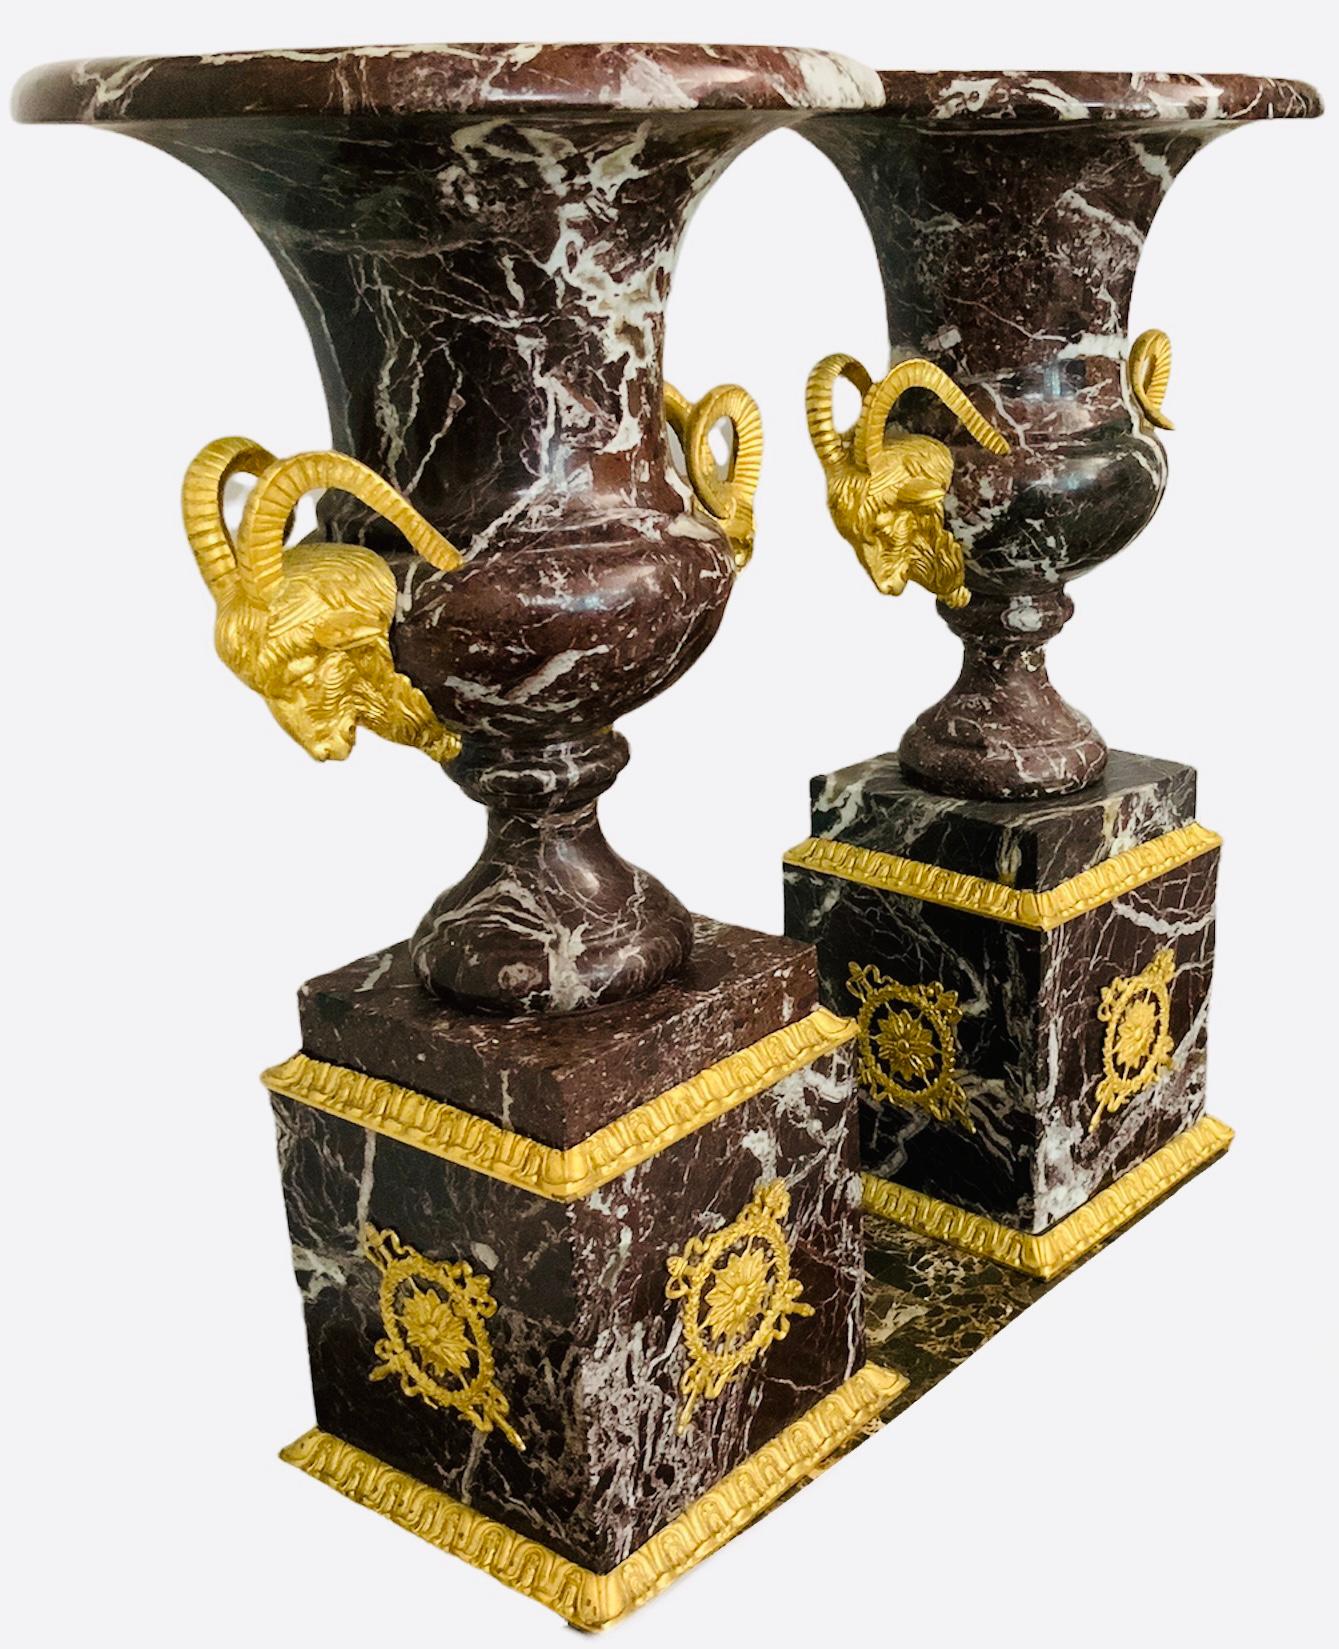 This is a set of brown marble bell shaped urns with gilt bronze ram heads and square marble pedestals. The marble has a bold white veining pattern. The ram heads are placed in the lower part of the body of the urns. The urns have a square shaped